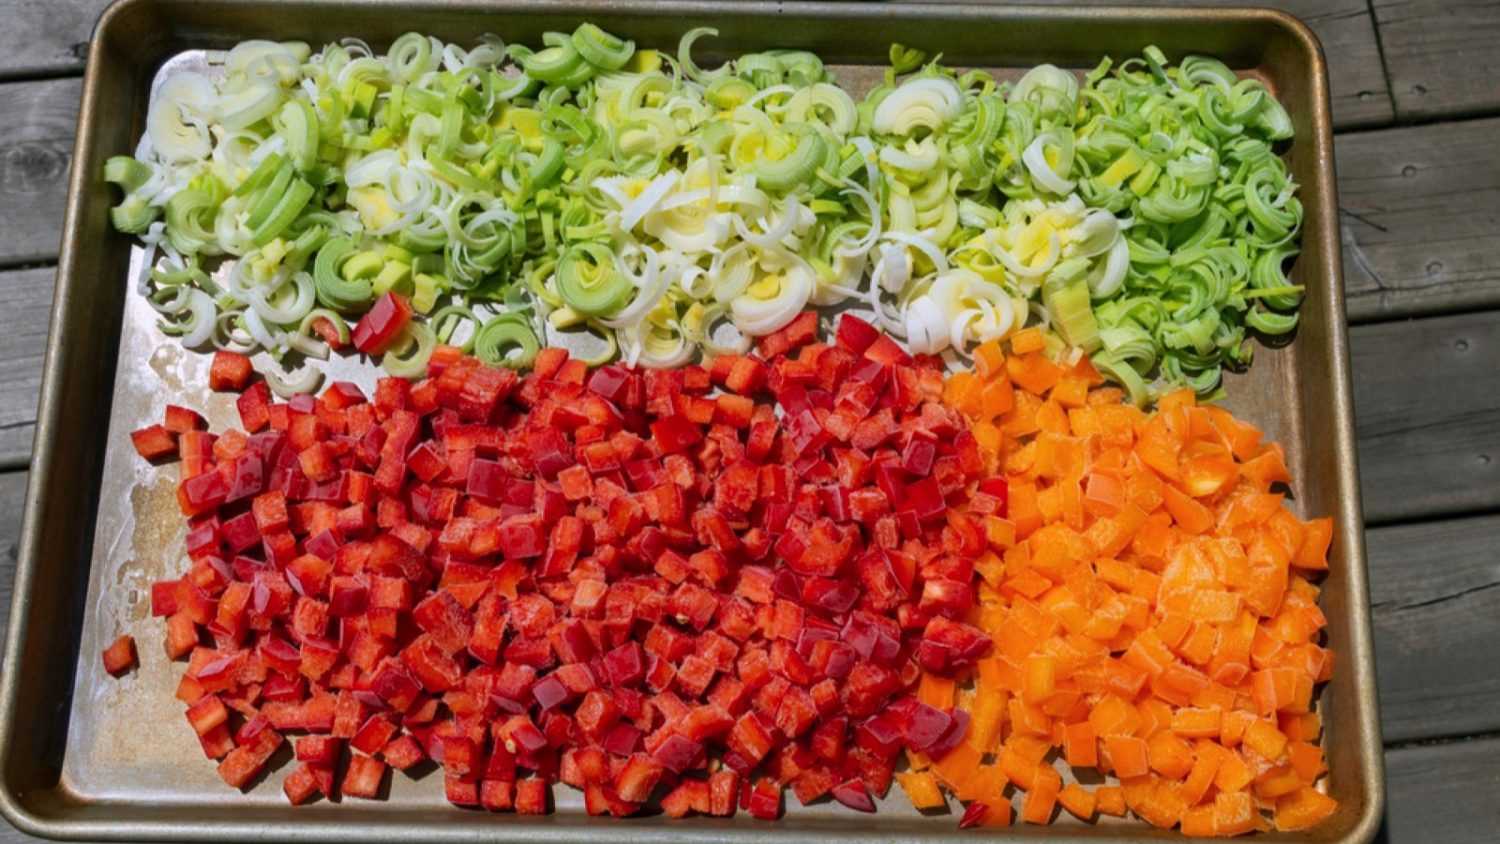 Cut vegetables in tray